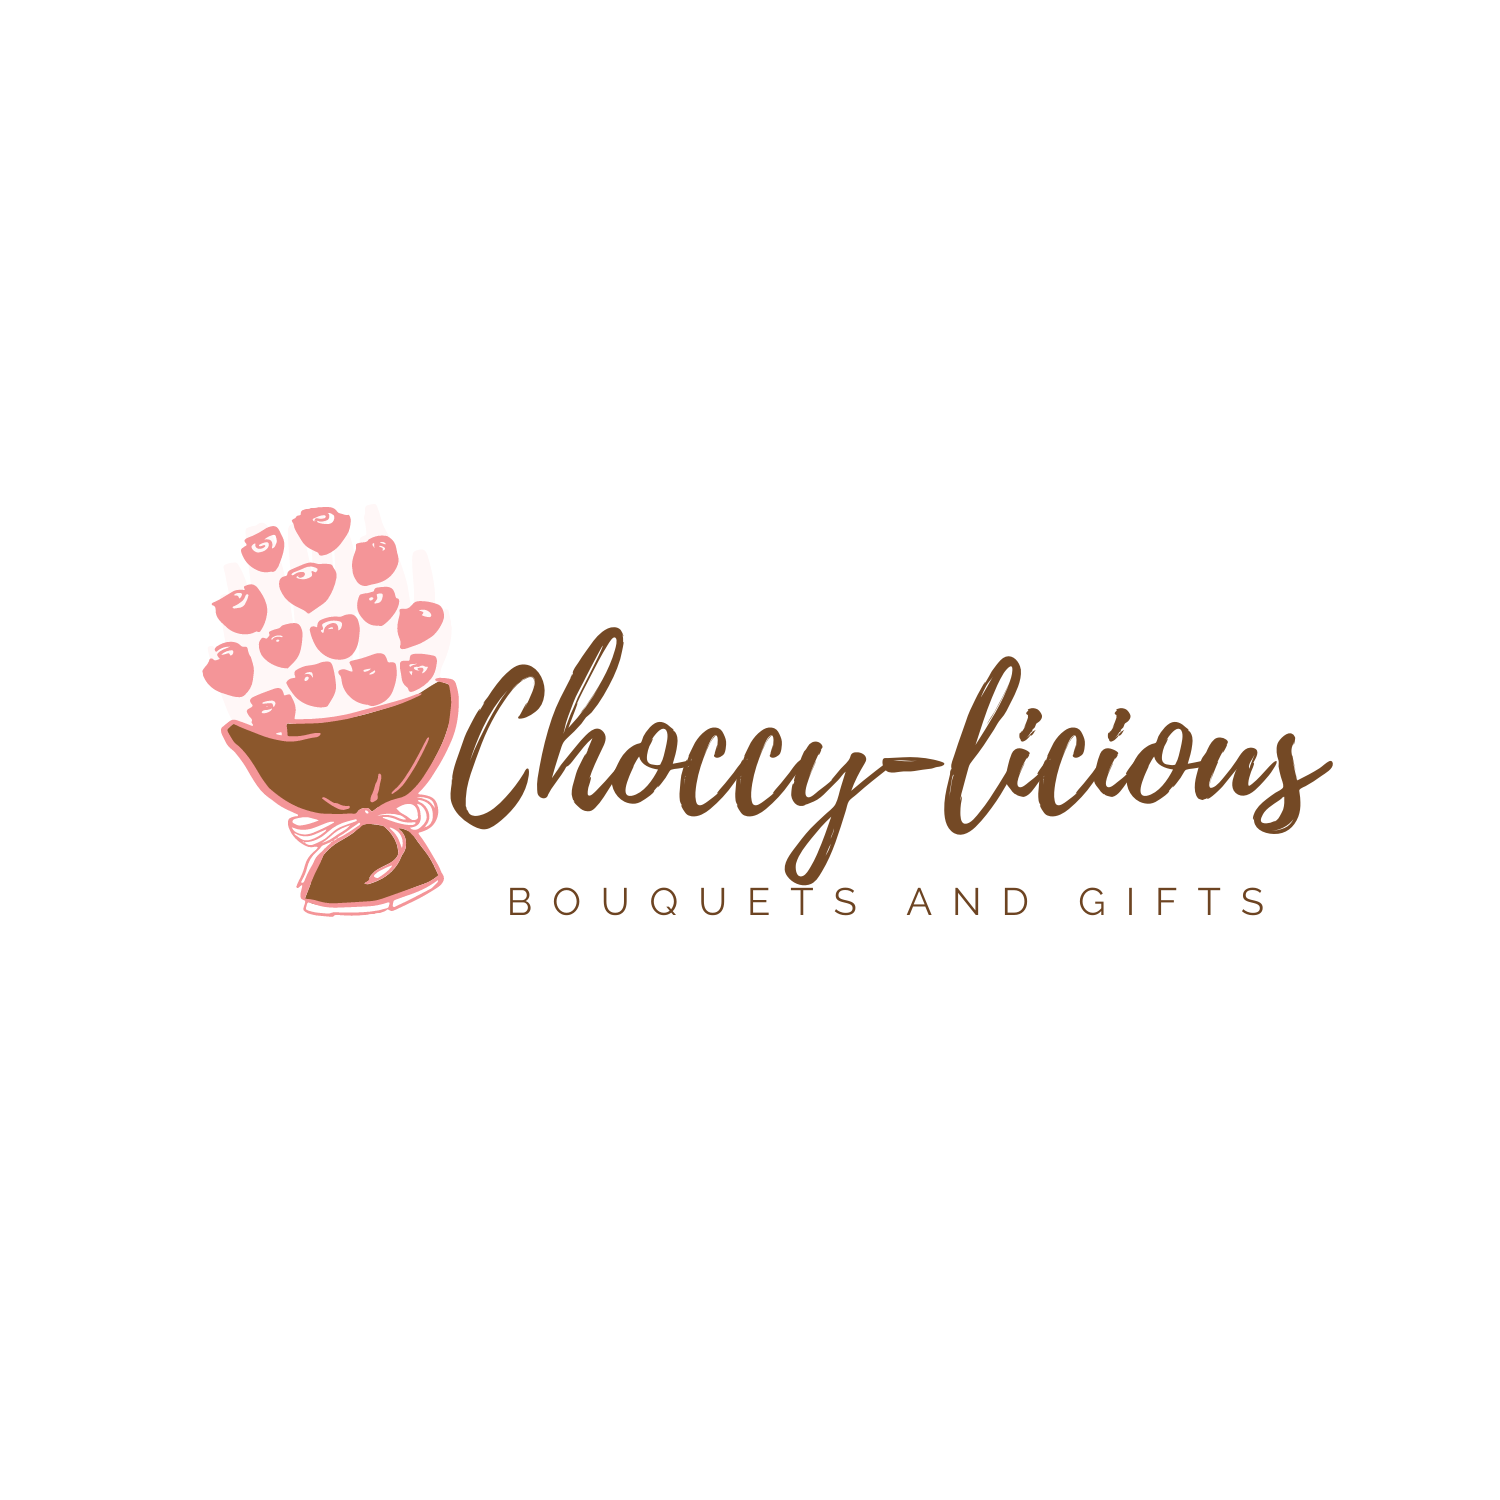 Choccy-licious Bouquets and Gifts, delivering 